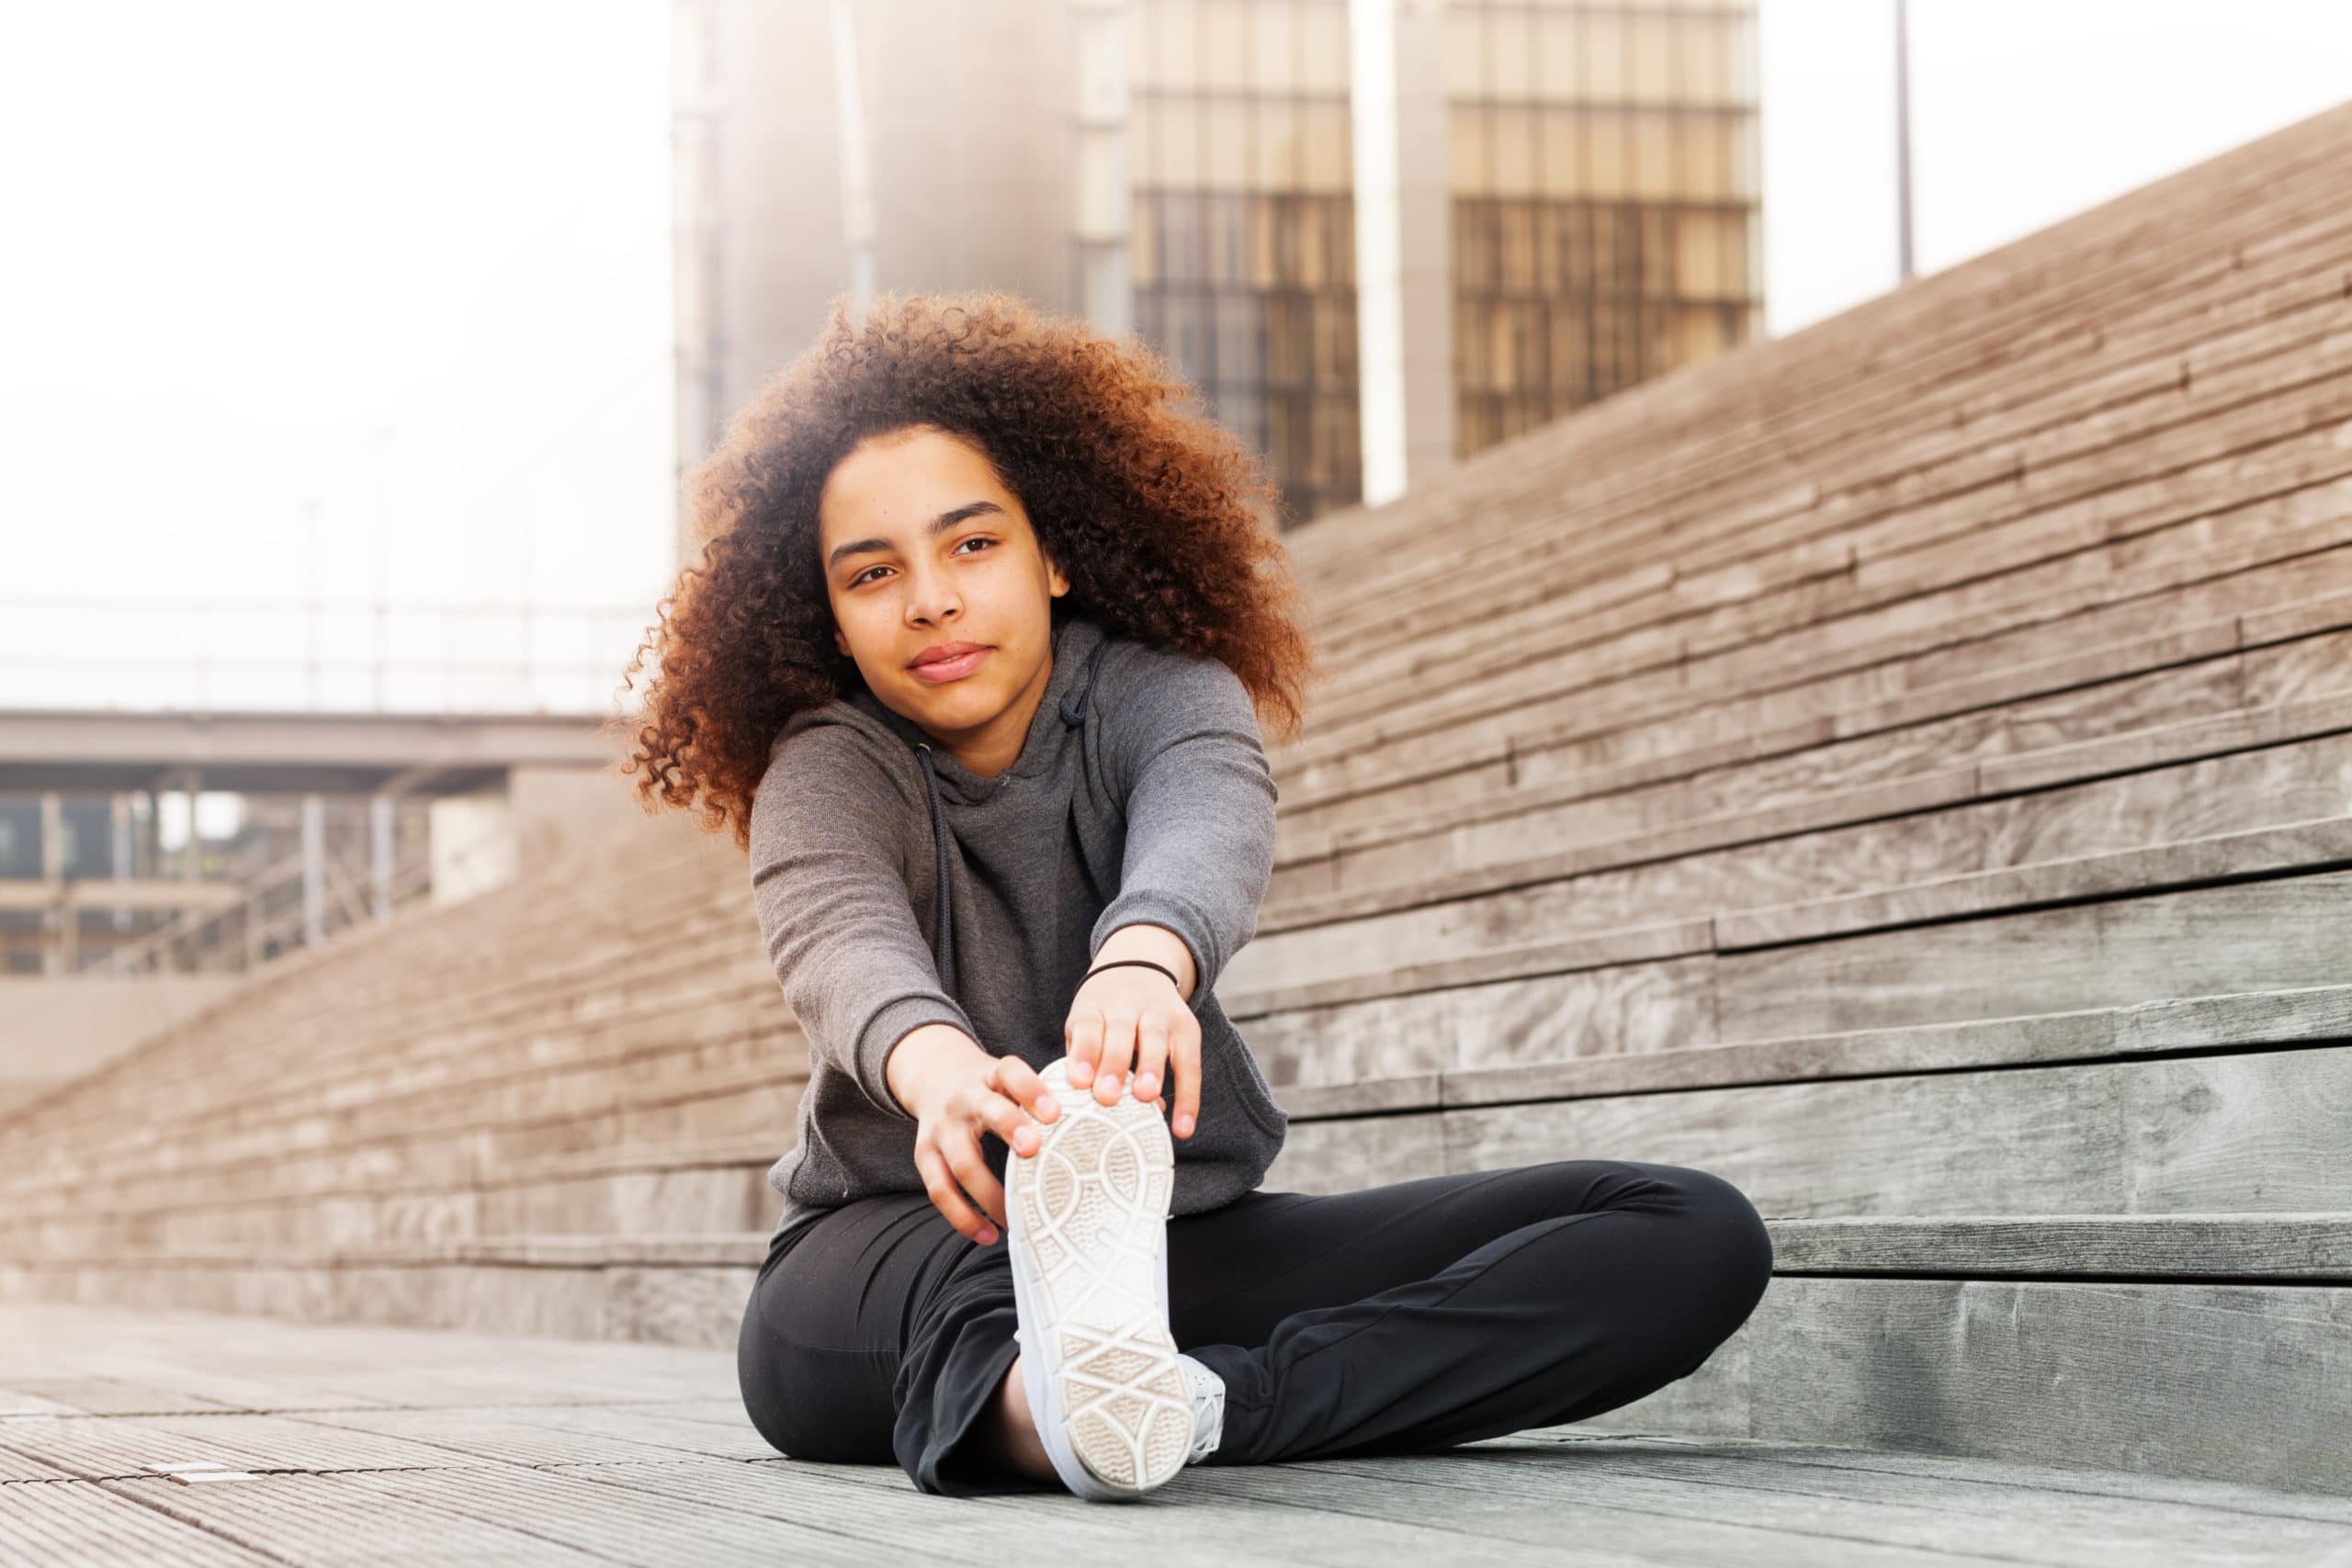 Young woman sitting down and stretching her legs